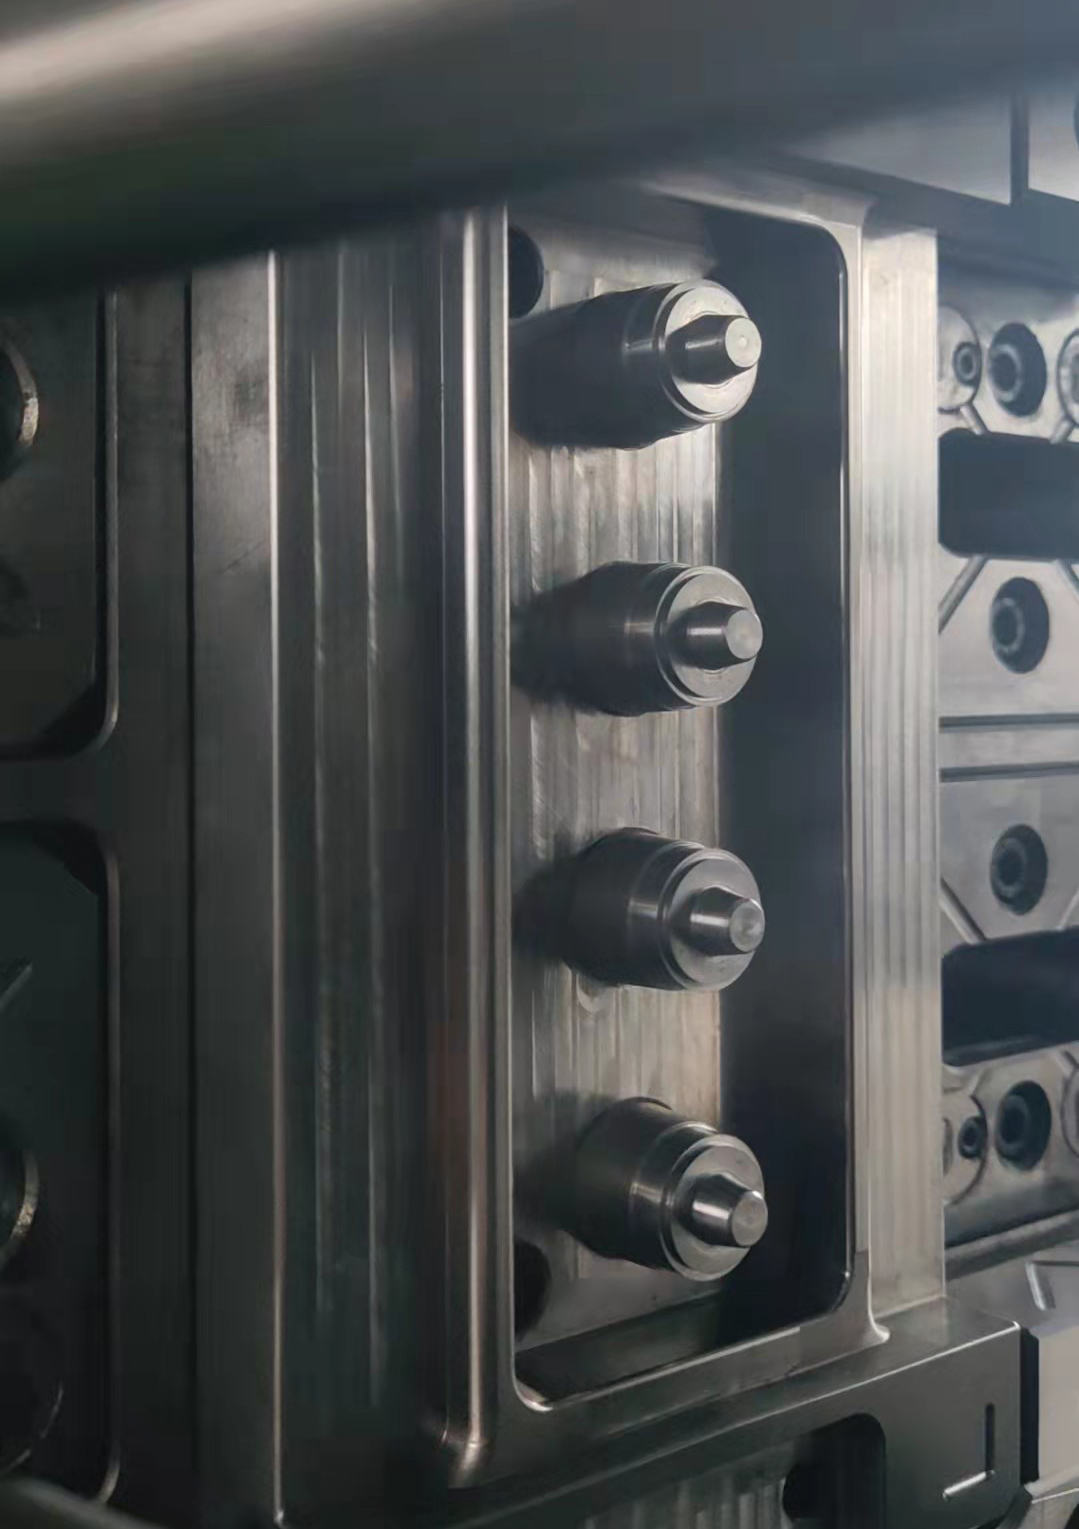 injection mold manufacturing